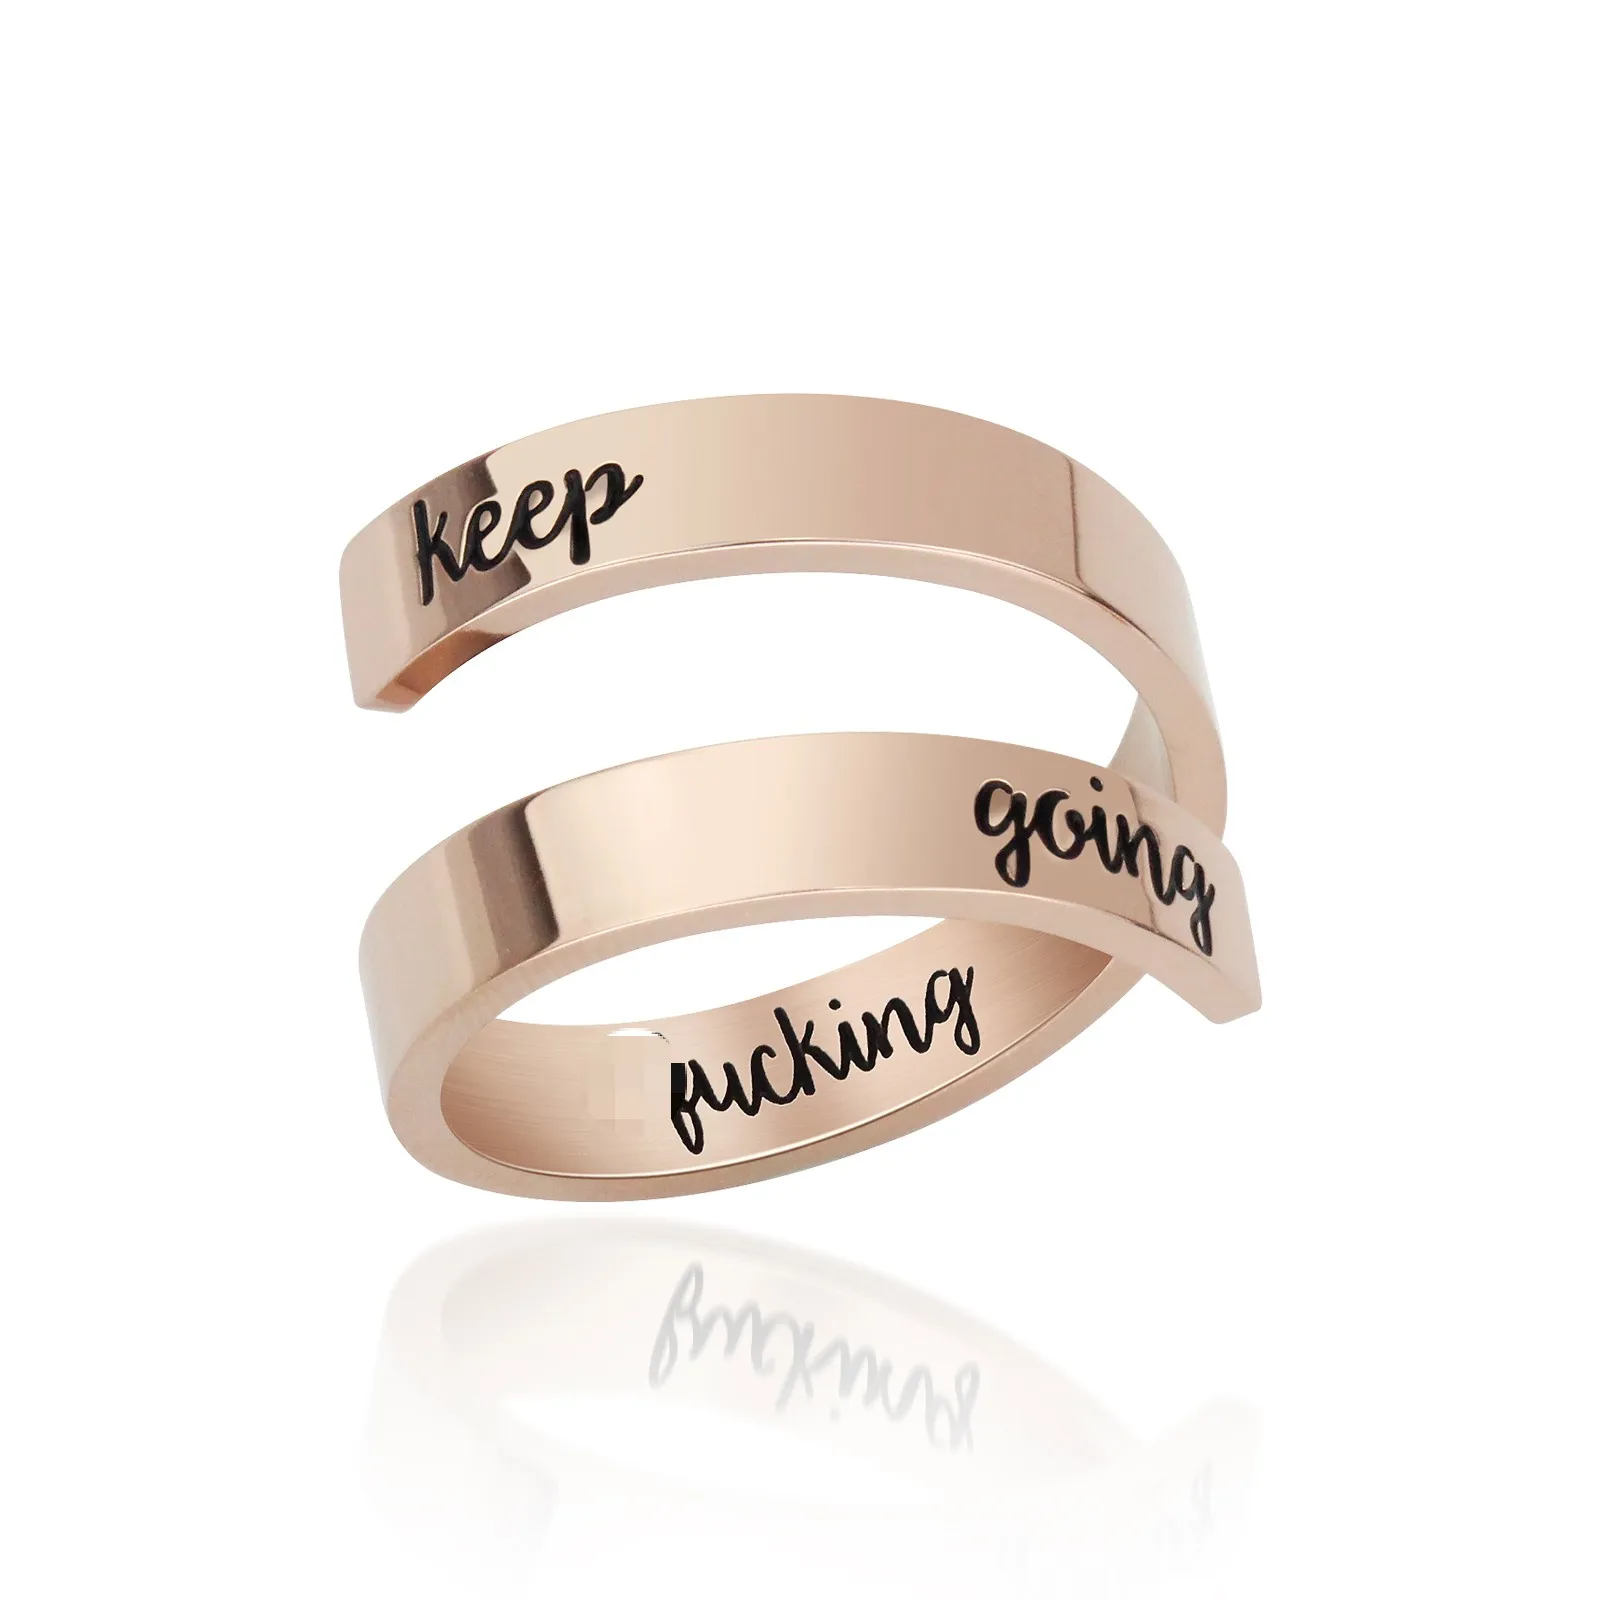 

Friendship Motivational Adjustable Stainless Steel ring girls Jewelry Graduation Gifts for Women Men, Steel / gold / rose gold / black